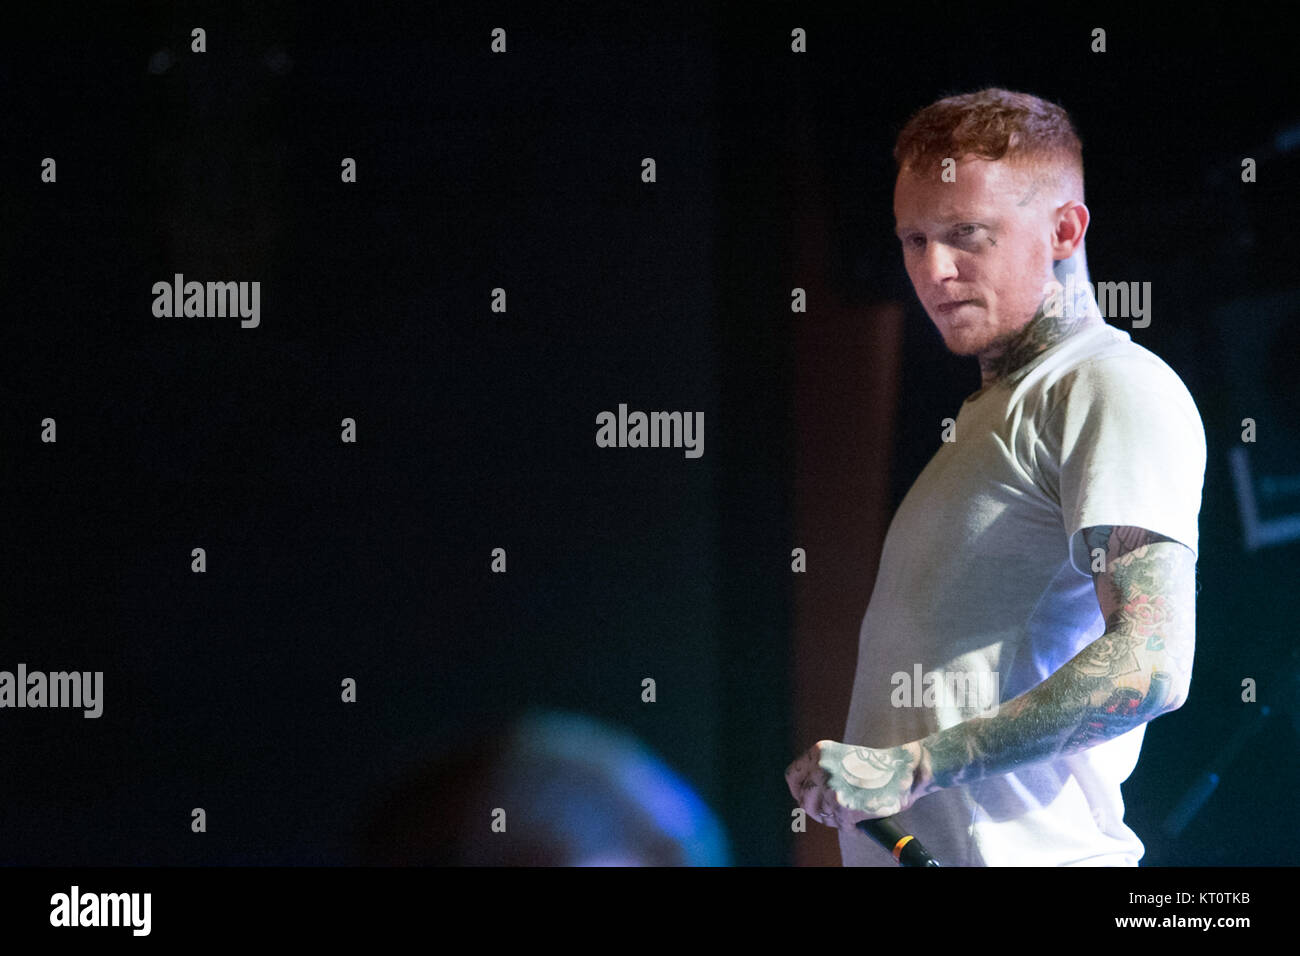 The English band Frank Carter & The Rattlesnakes perform a live concert at Parkteatret in Oslo. Frank Carter is also known from the band Gallows and Pure Love. Norway, 01/12 2015. Stock Photo